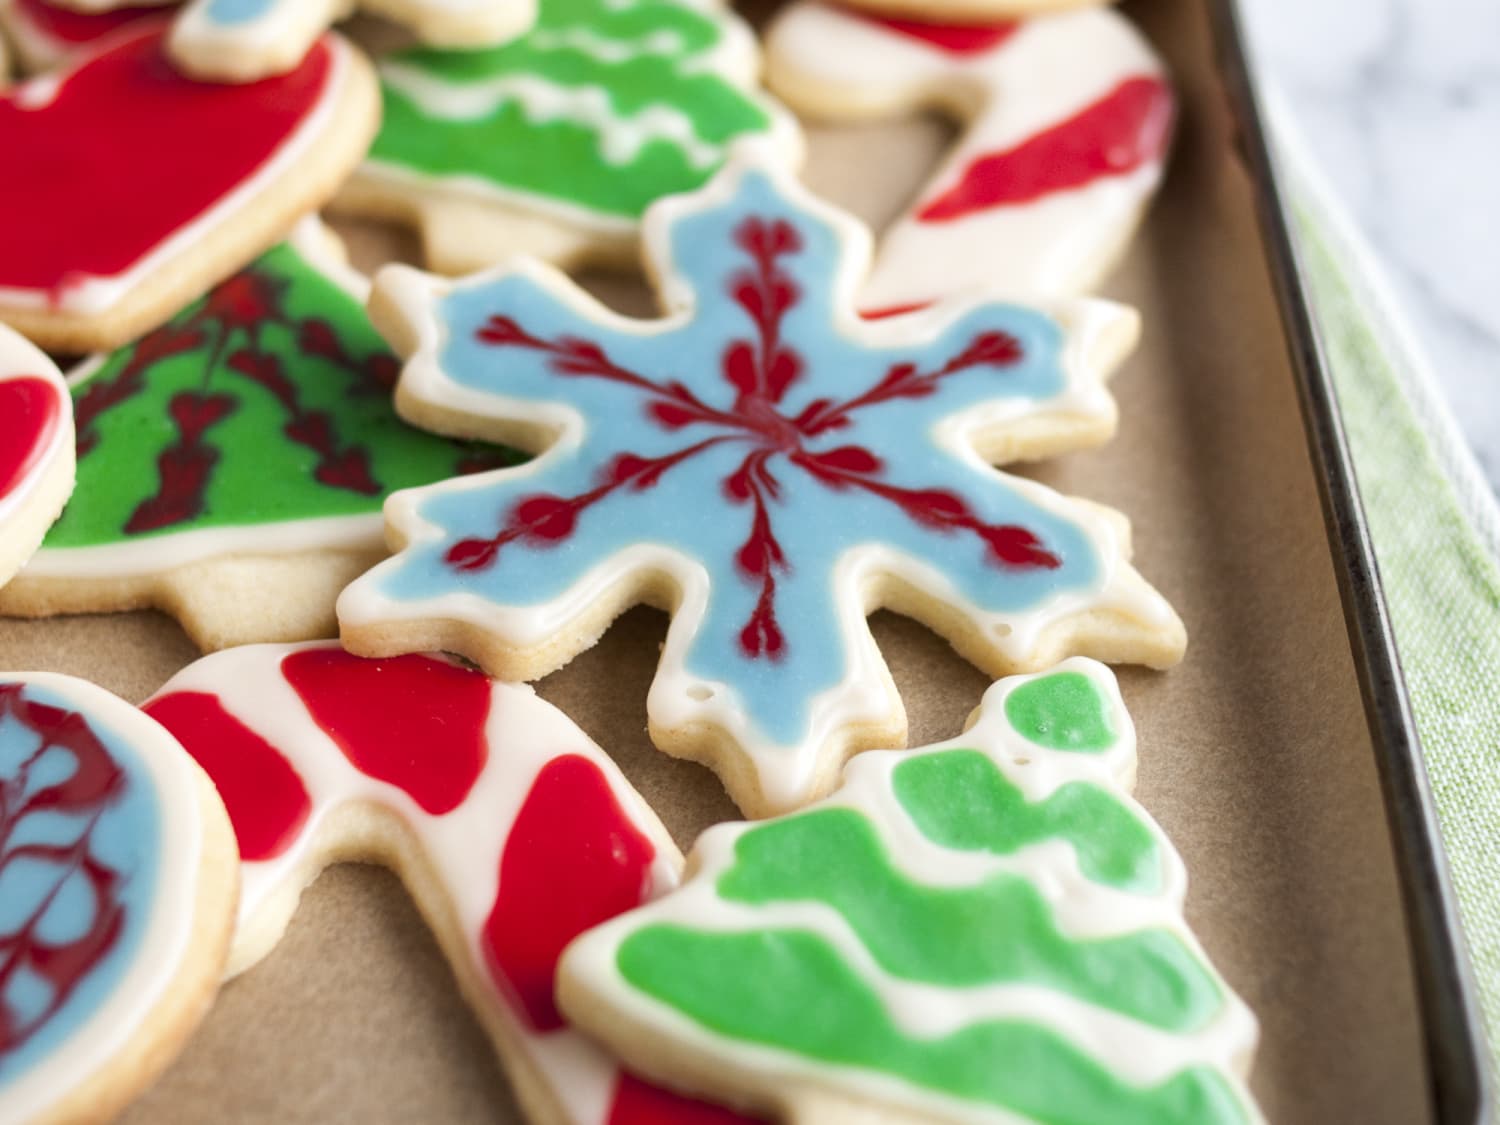 How To Decorate Cookies with Icing: The Easiest Method